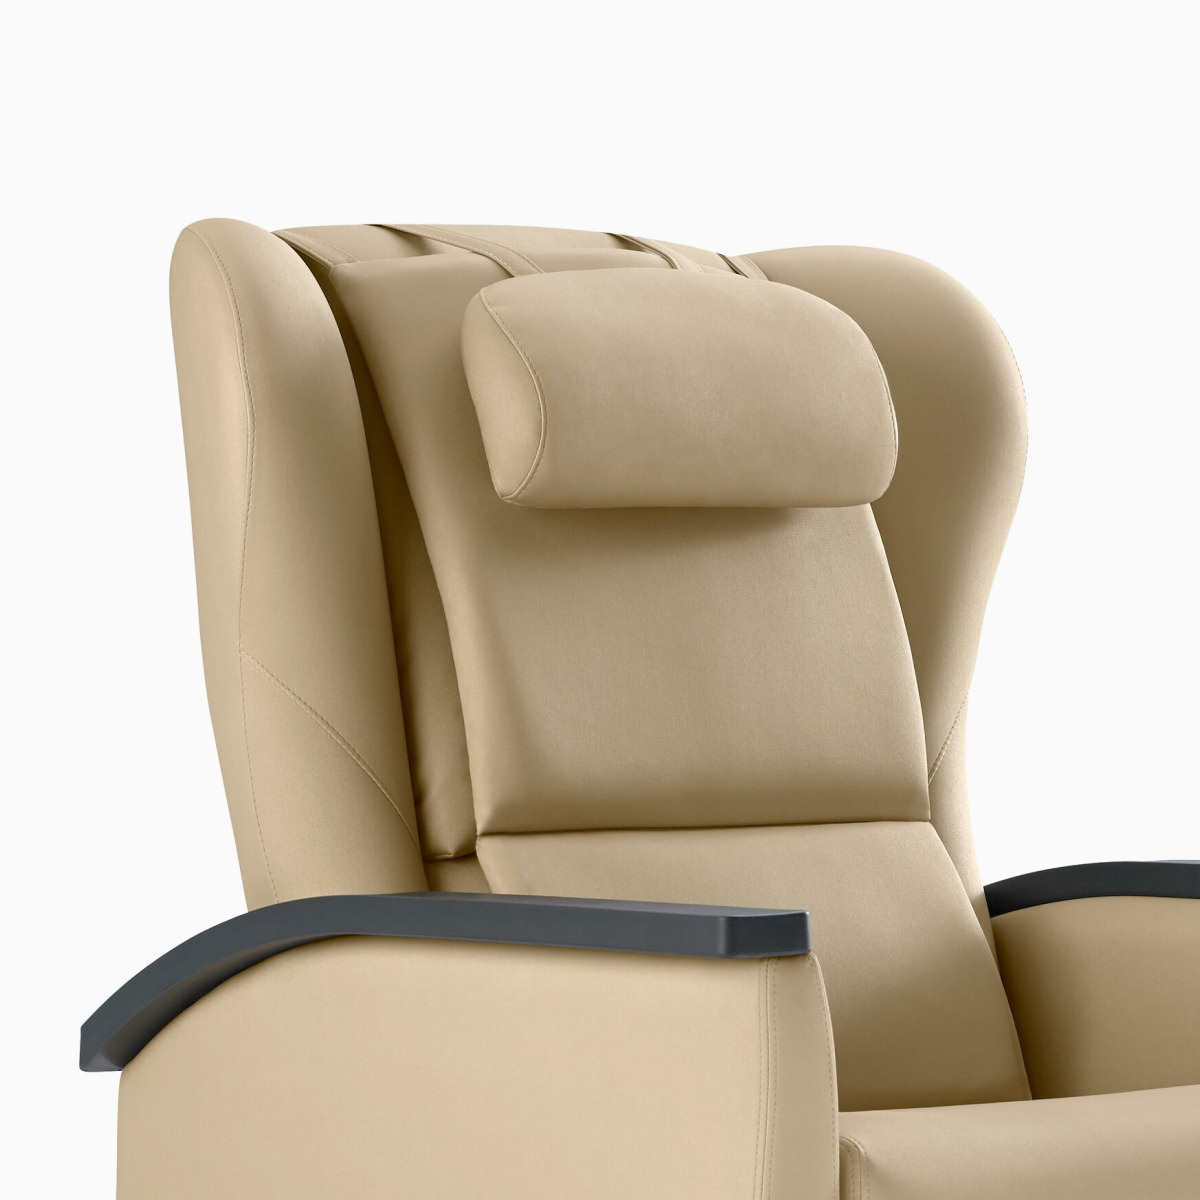 Close-up of a Nemschoff Serenity Recliner showing the back with a headrest and back pad and arms with urethane arm caps.